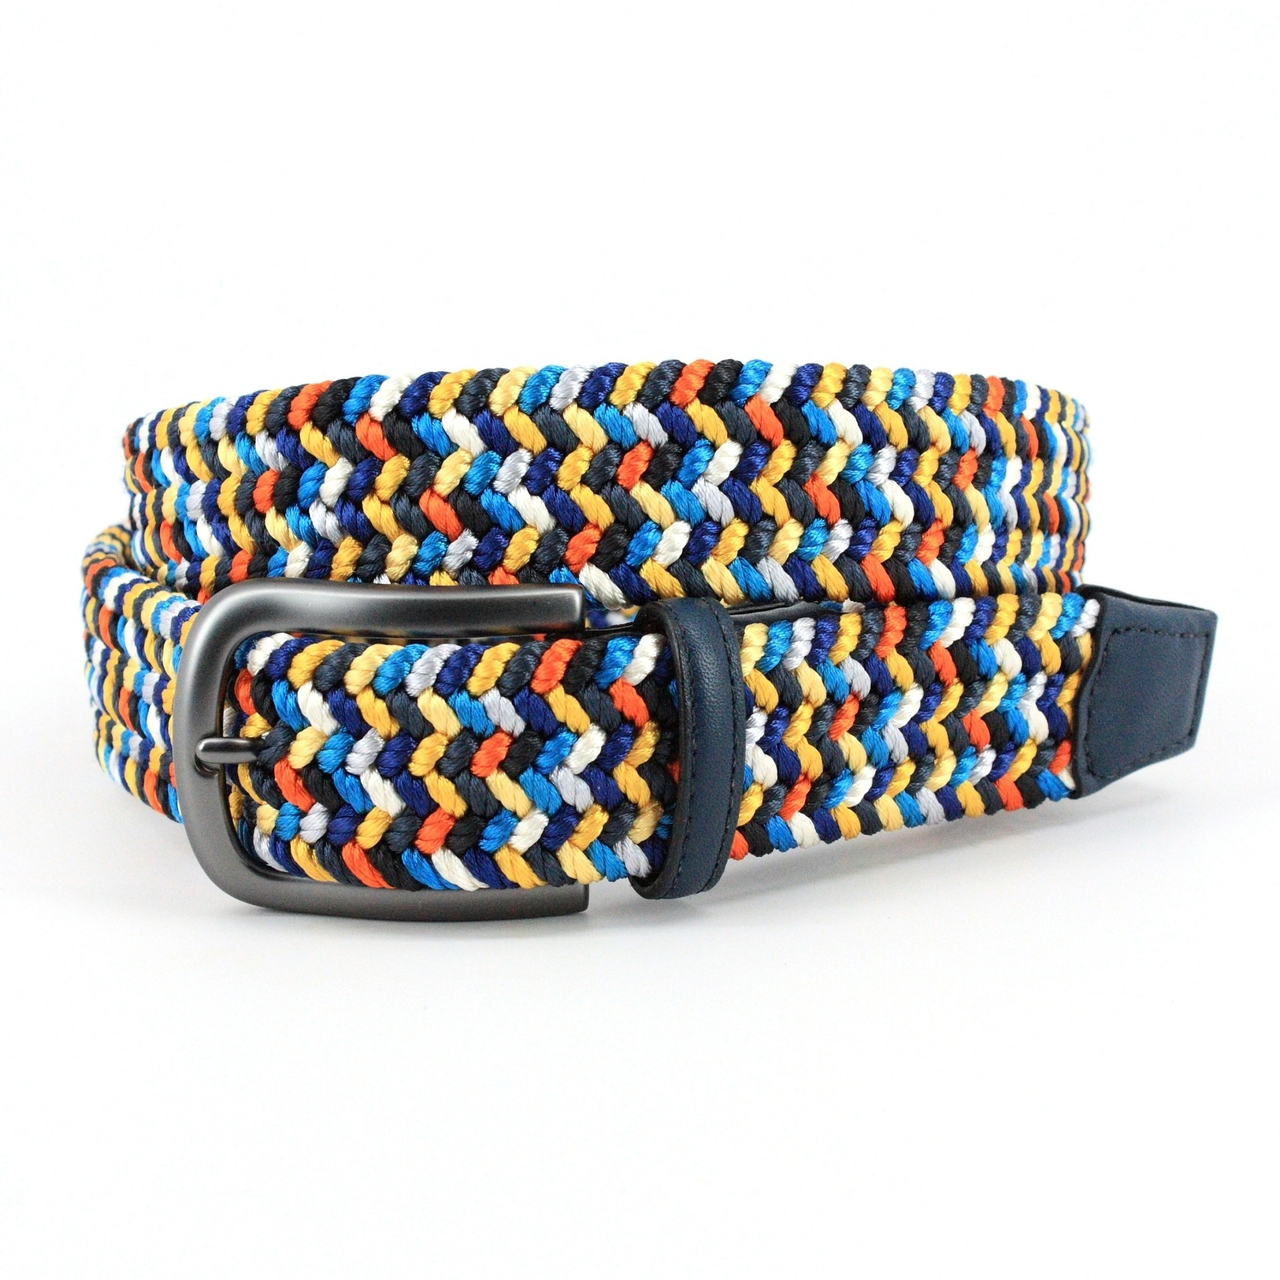 Italian Woven Rayon Elastic Belt in Navy Multi by Torino Leather Co. -  Hansen's Clothing